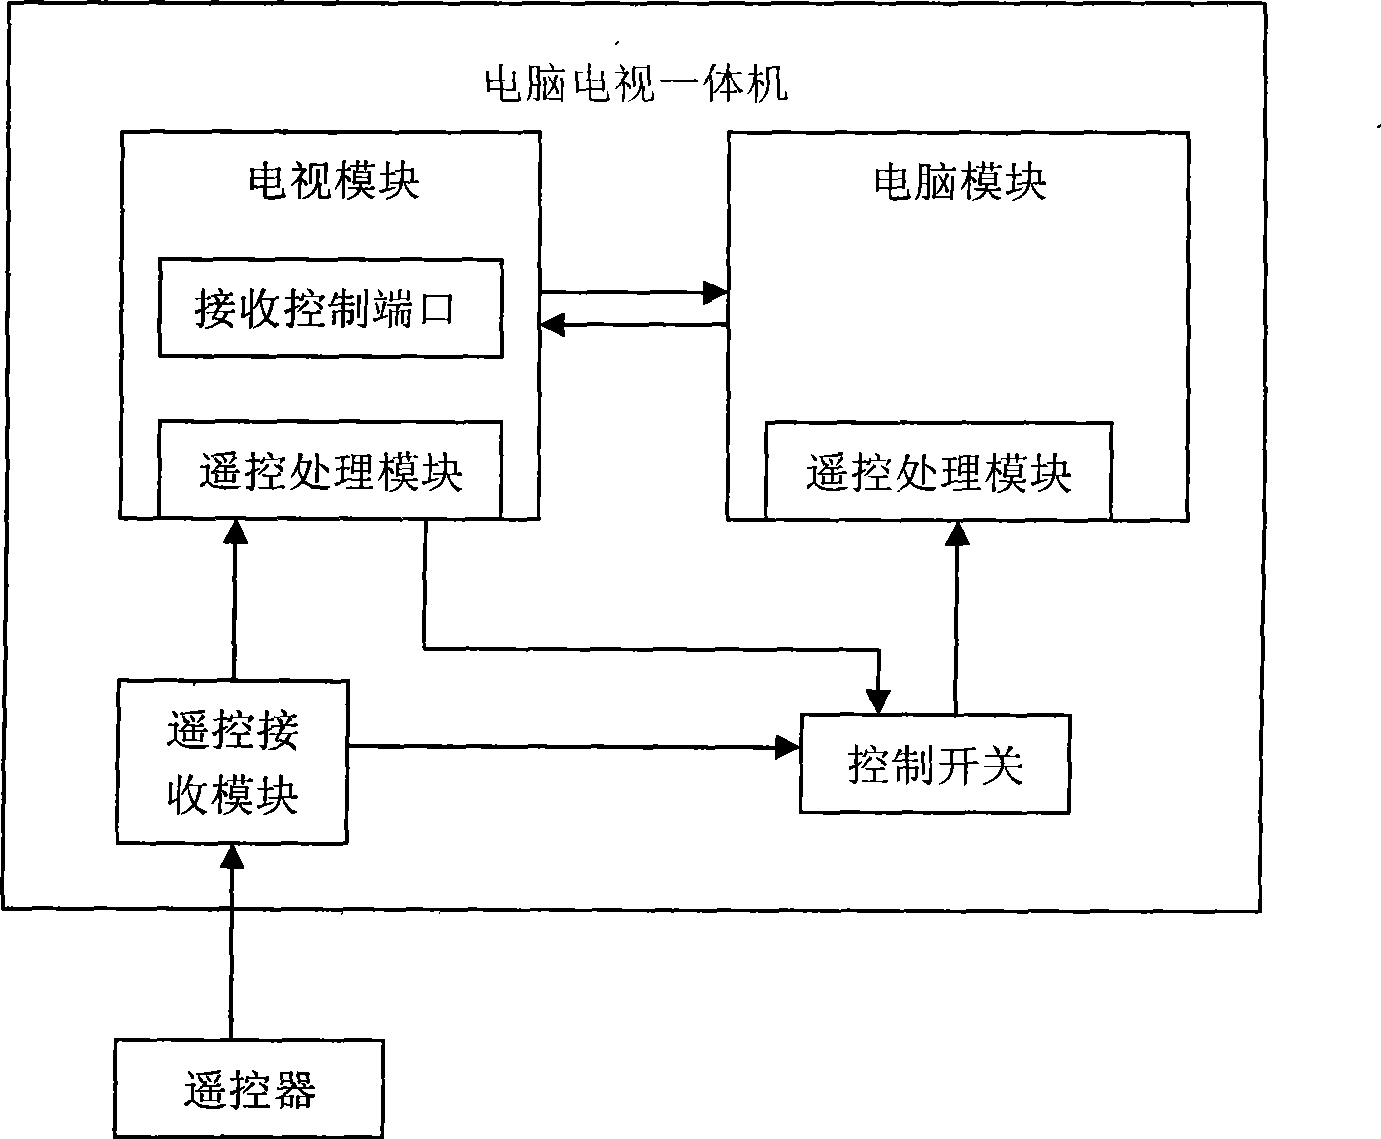 Wireless remote control method for computer and television integrated machine